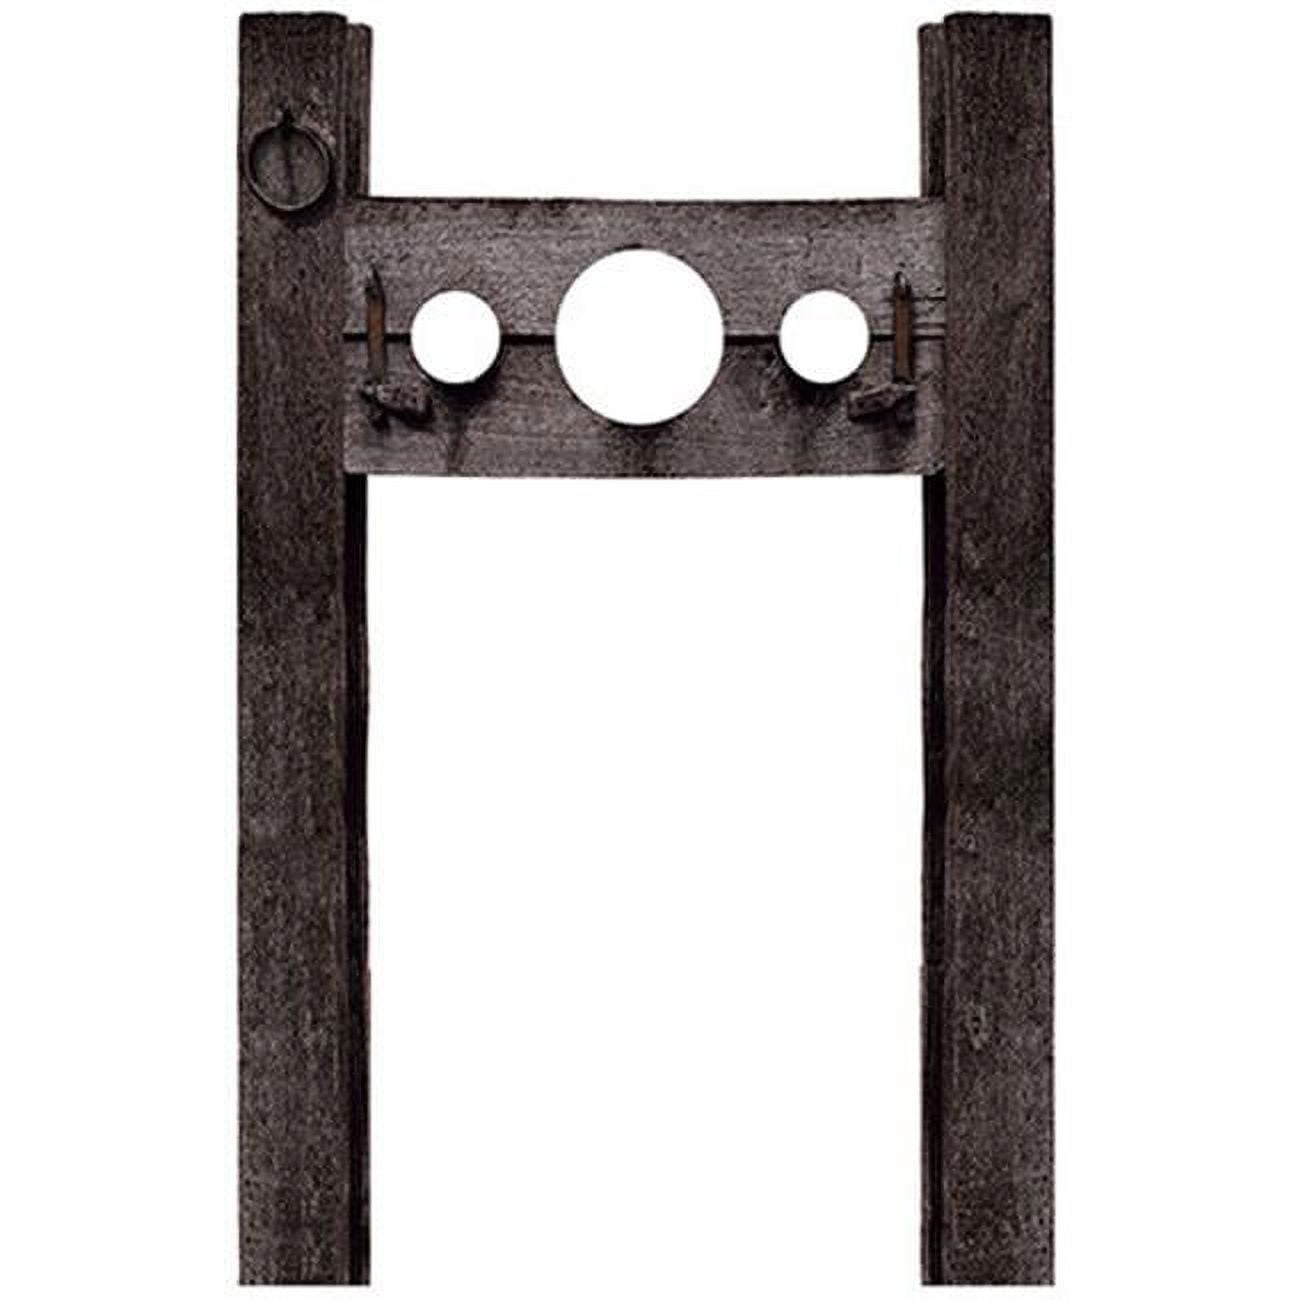 2519 69 X 44 In. Pillory Post Wall Decal